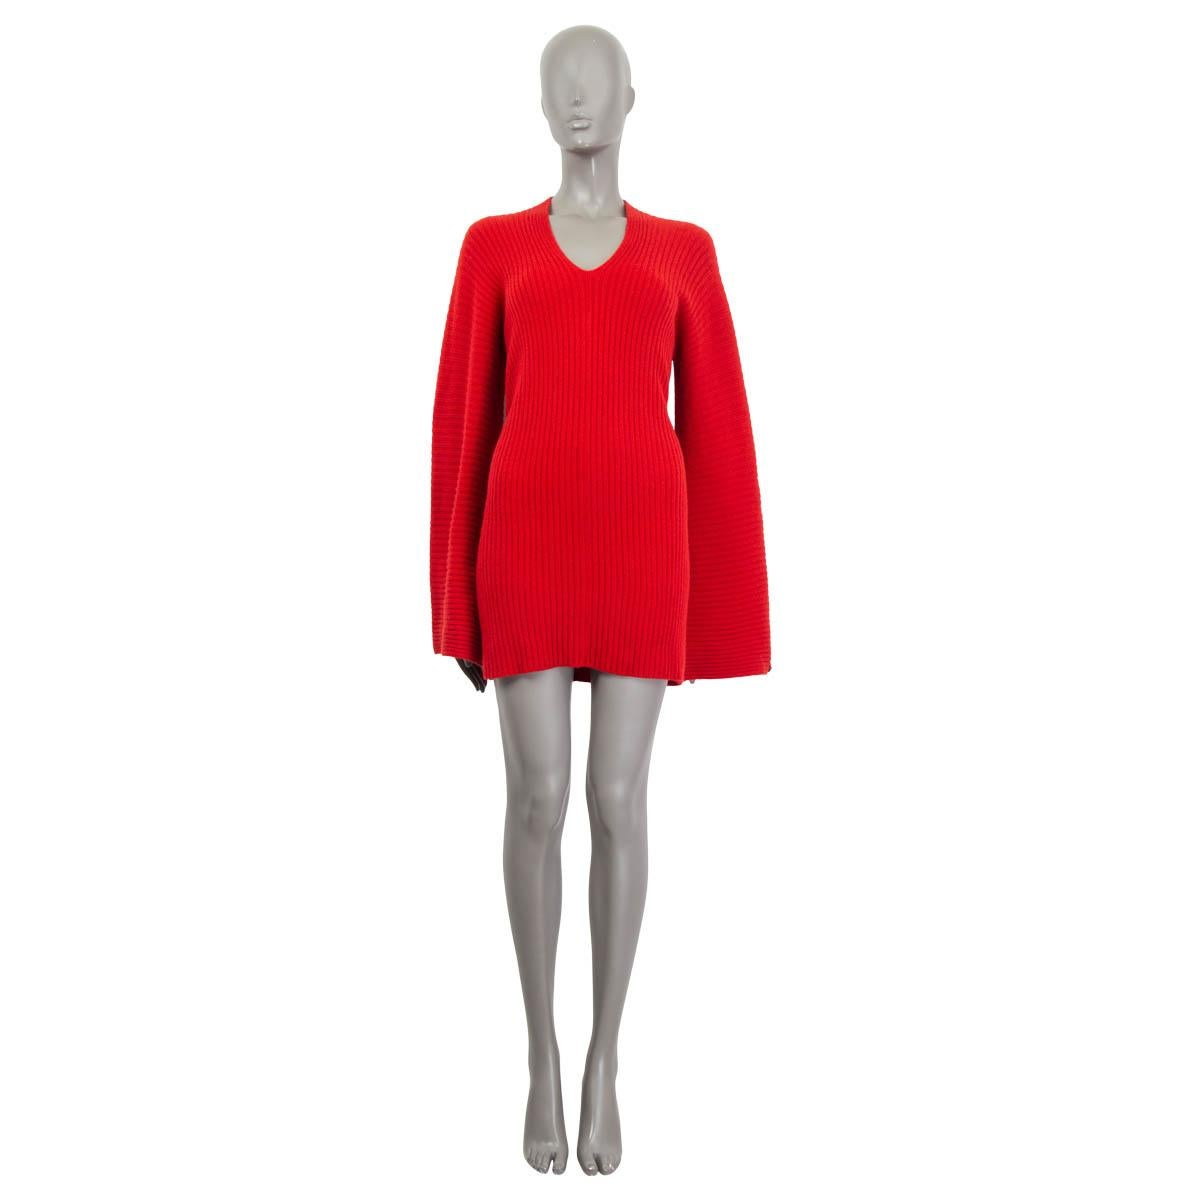 100% authentic Chanel 2010 bell sleeve mini knit dress in red cashmere (100%). Features a knot at the back and a v-neck. Unlined. Has been worn and is in excellent condition.

Measurements
Tag Size	36
Size	XS
Bust	80cm (31.2in) to 100cm